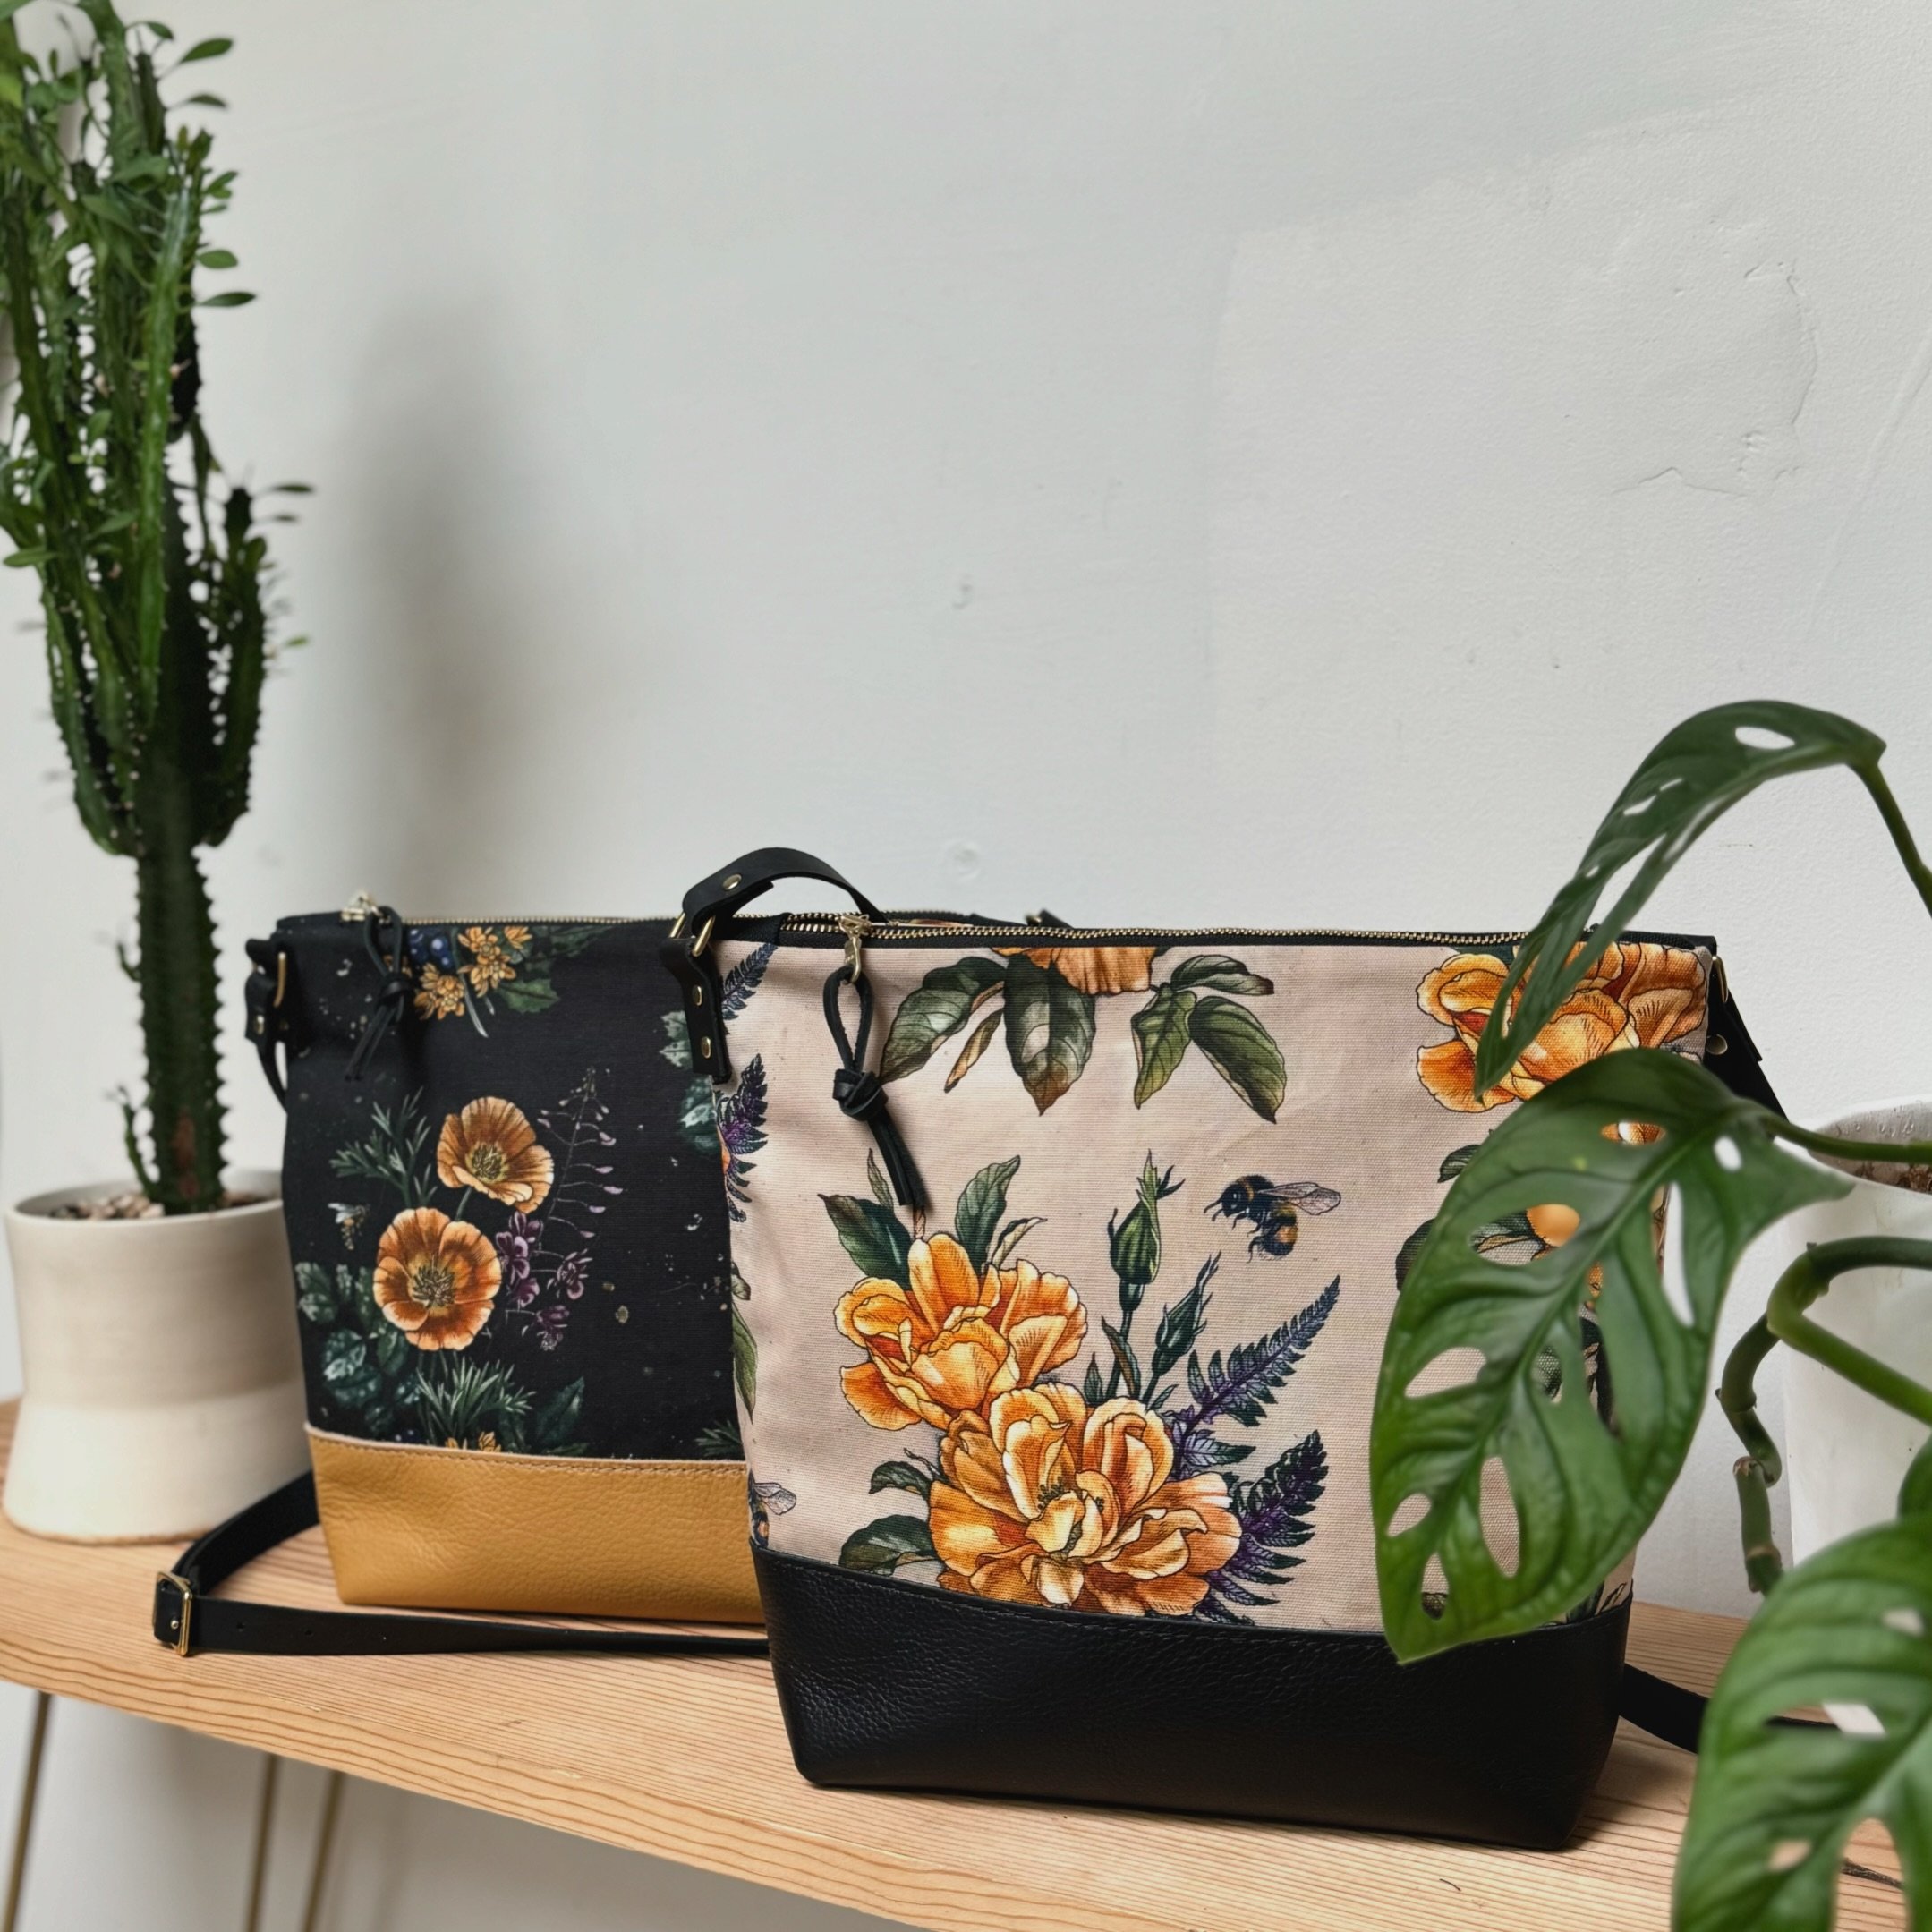 I LOVE this new bag! Our new Coco Crossbody, shown here in gorgeous fabrics designed by @alicestattoos of @wonderlandpdx 💛 California Poppy, Alaskan Fireweed, Oregon Grape &amp; Honey Bee AND Yellow Rose with Fern &amp; Bee. The perfect size and 4 i